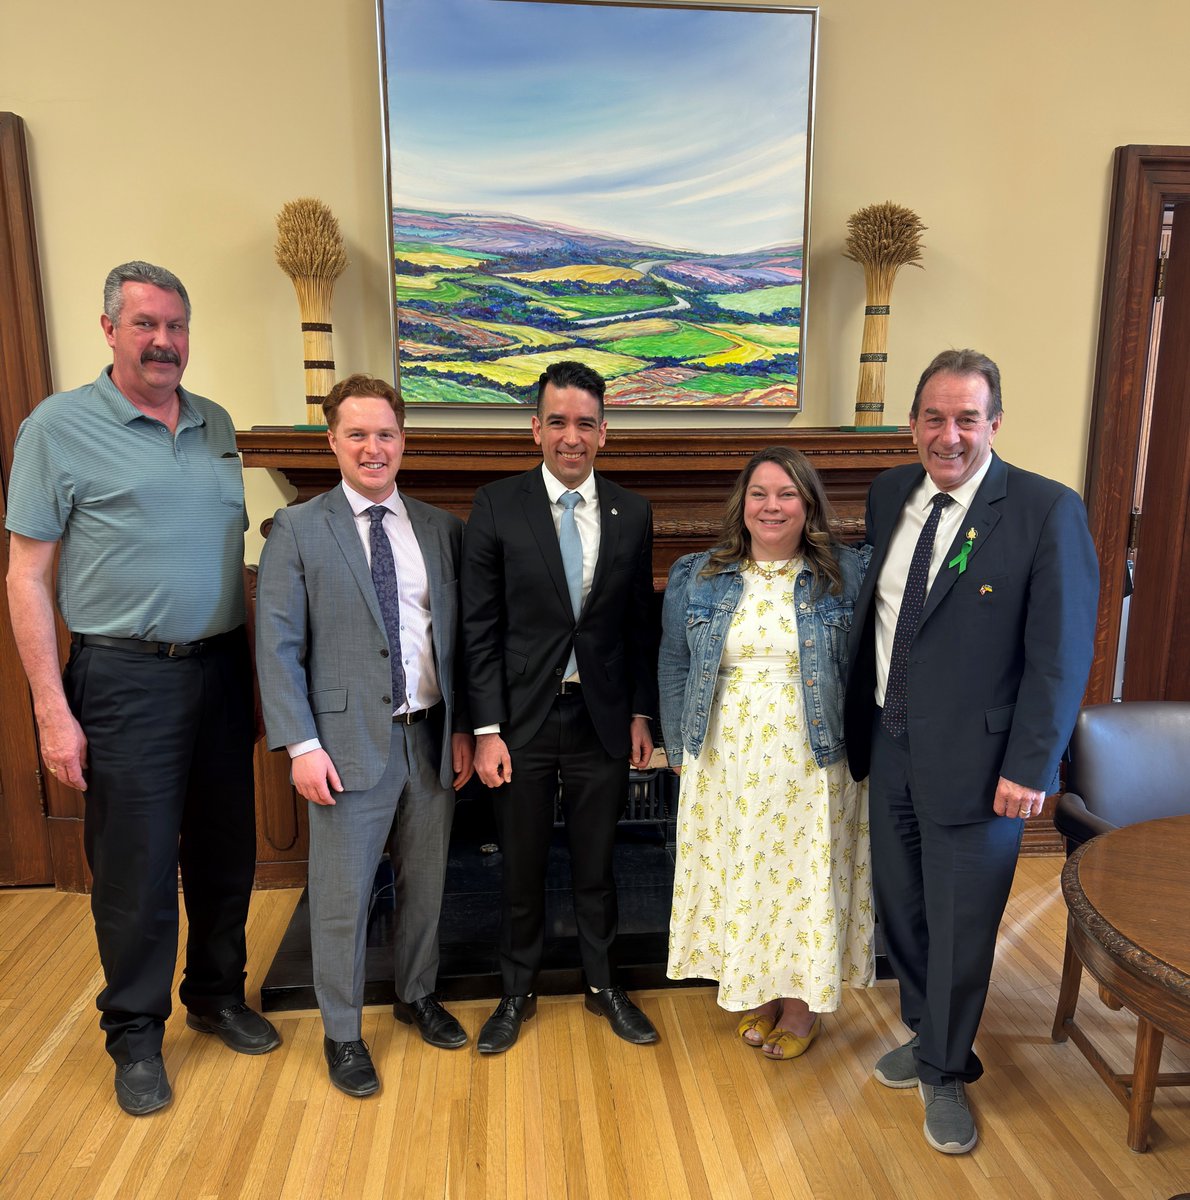 Thank you to Ron Kostyshyn, Manitoba’s Minister of Agriculture for meeting the CPA and @KAP_Manitoba. We appreciate your time and attention to discussing the Propane Decarbonization Roadmap for Canada and the important role of propane in Manitoba’s agricultural sector. #propane